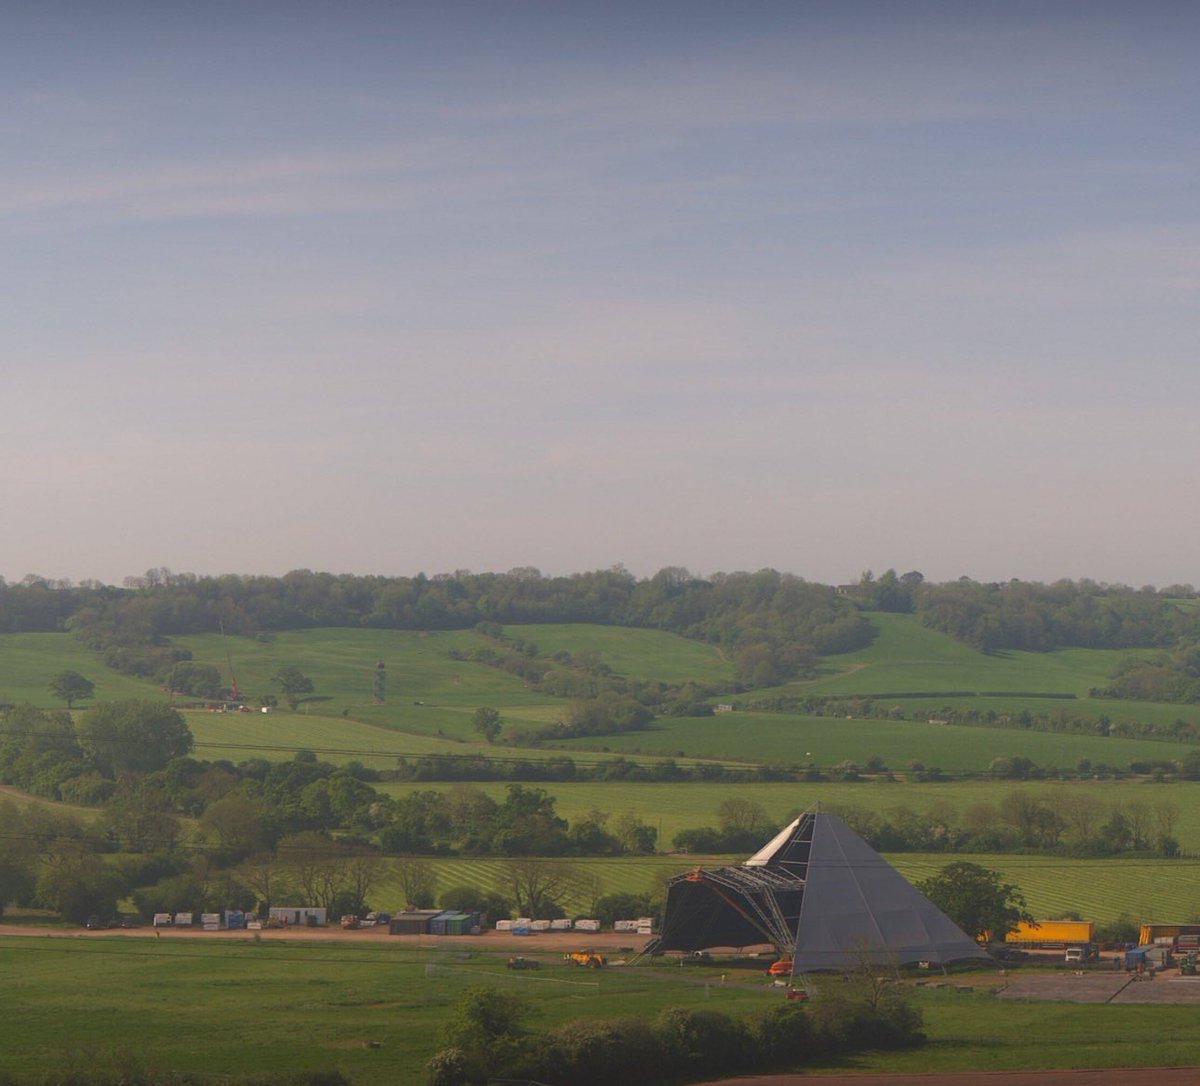 Worthy Farm right now. The Pyramid Stage dressing, the ribbon tower scaffold, preparations for Glastonbury-On-Sea and the sun is shining ☀️ Only 48 little days to go 😎 🍺 #Glastonbury #Glasto bbc.co.uk/events/glaston…